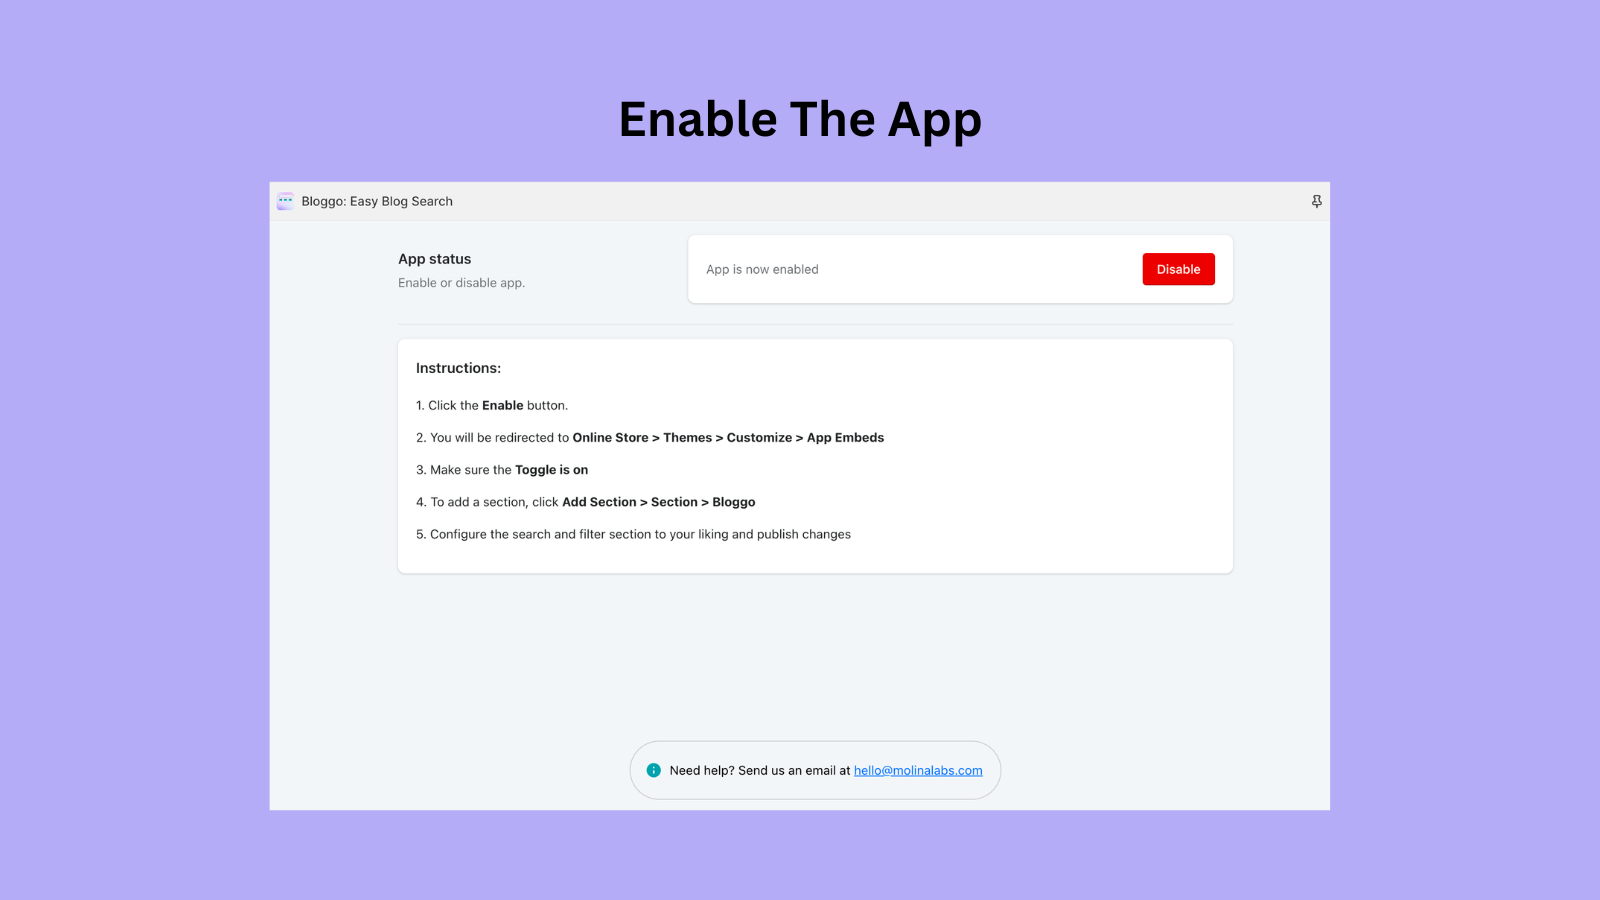 Enable the app